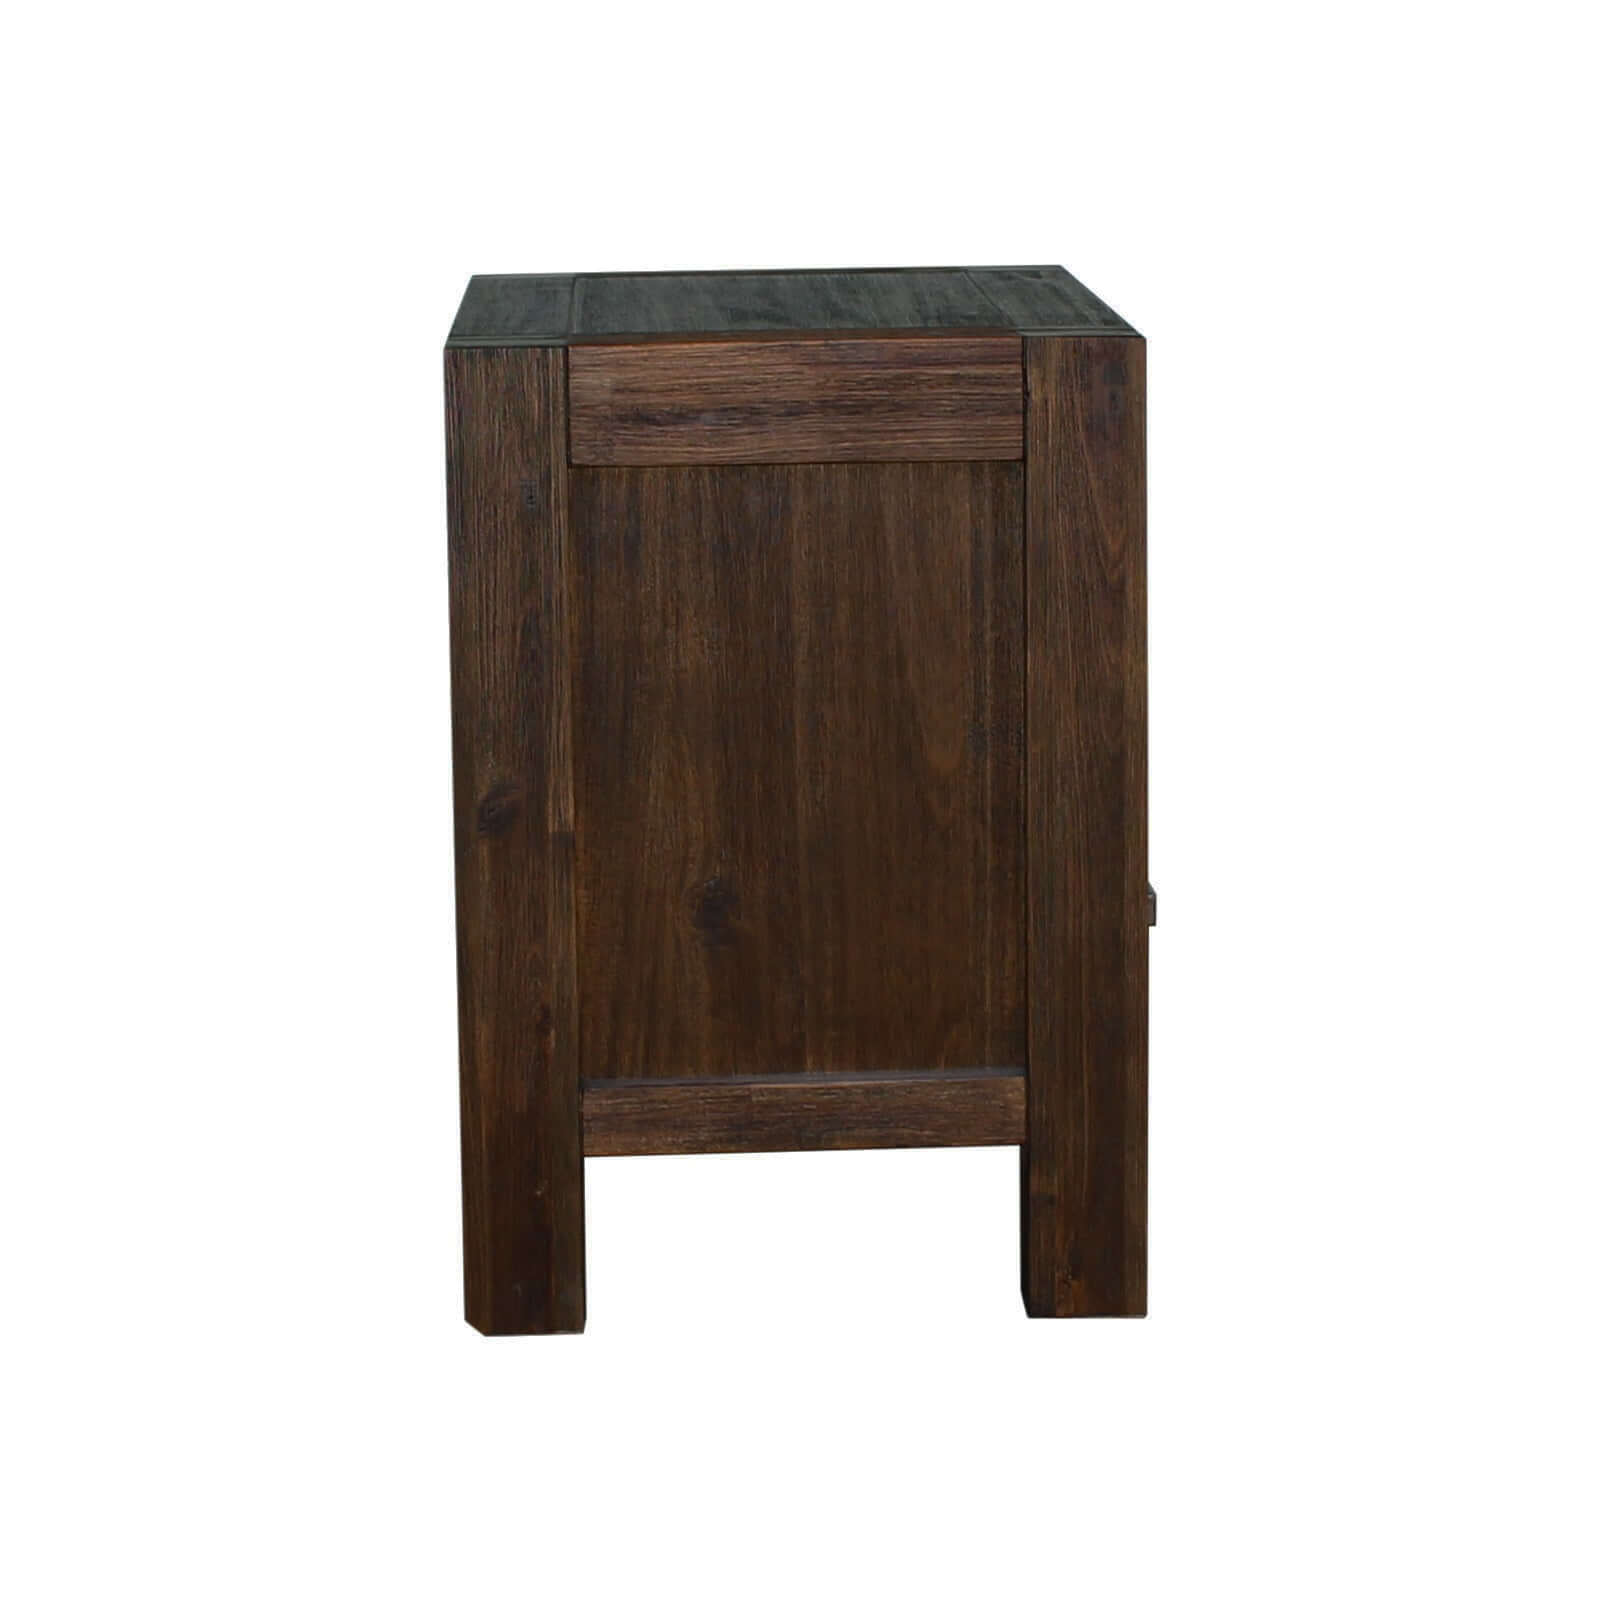 Buy bedside table 2 drawers night stand solid wood acacia storage in chocolate colour - upinteriors-Upinteriors